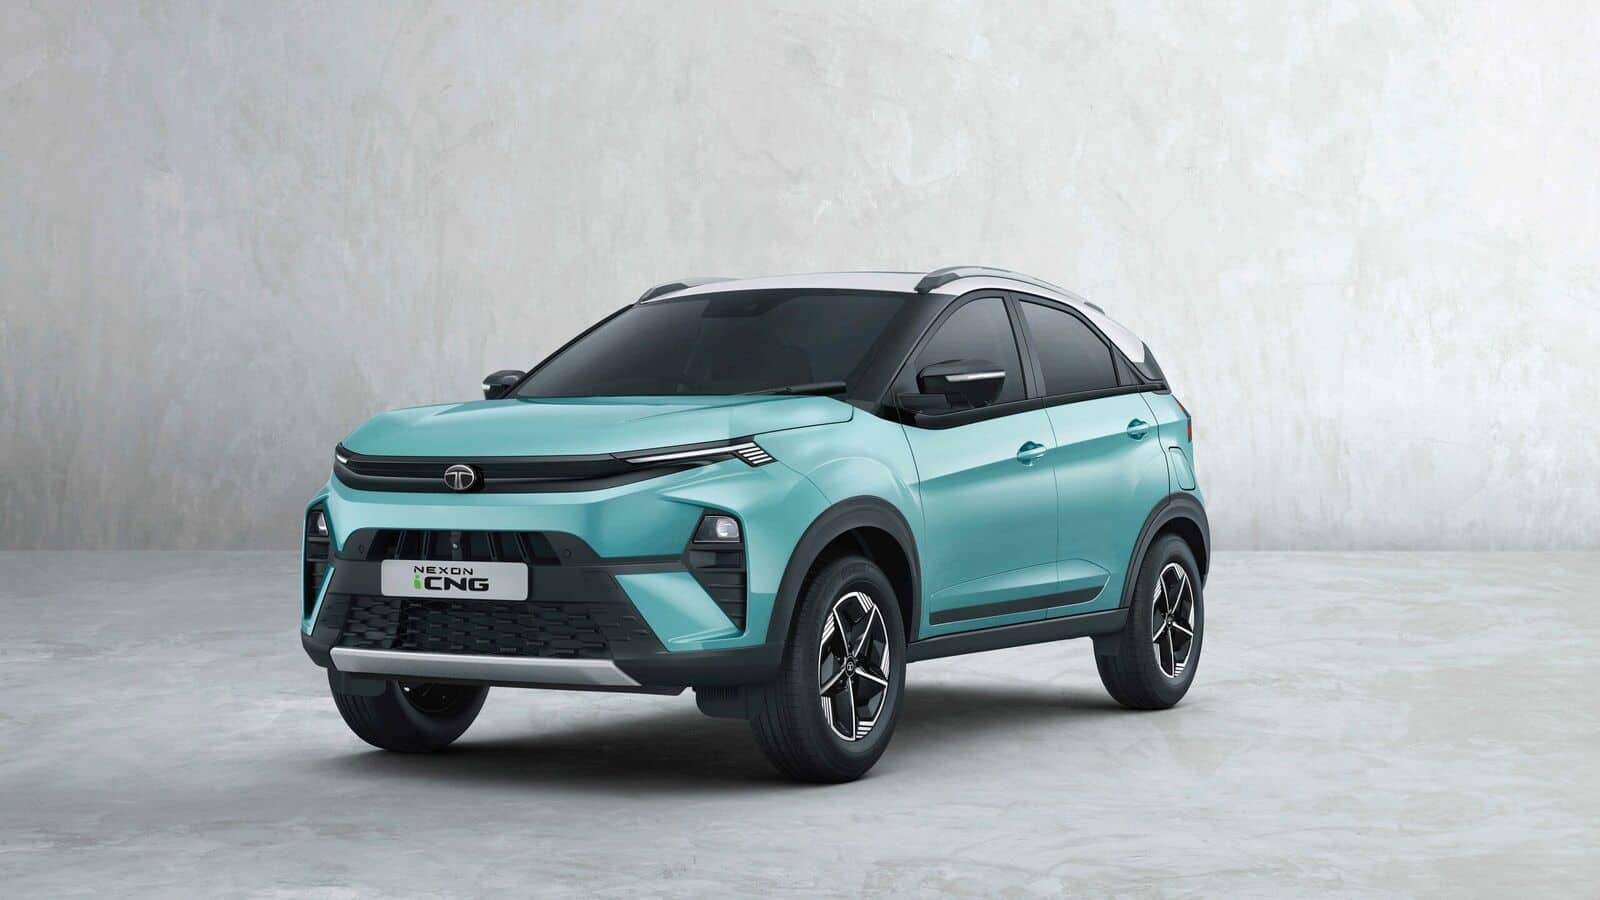 Tata Nexon iCNG may debut in India by 2024 end